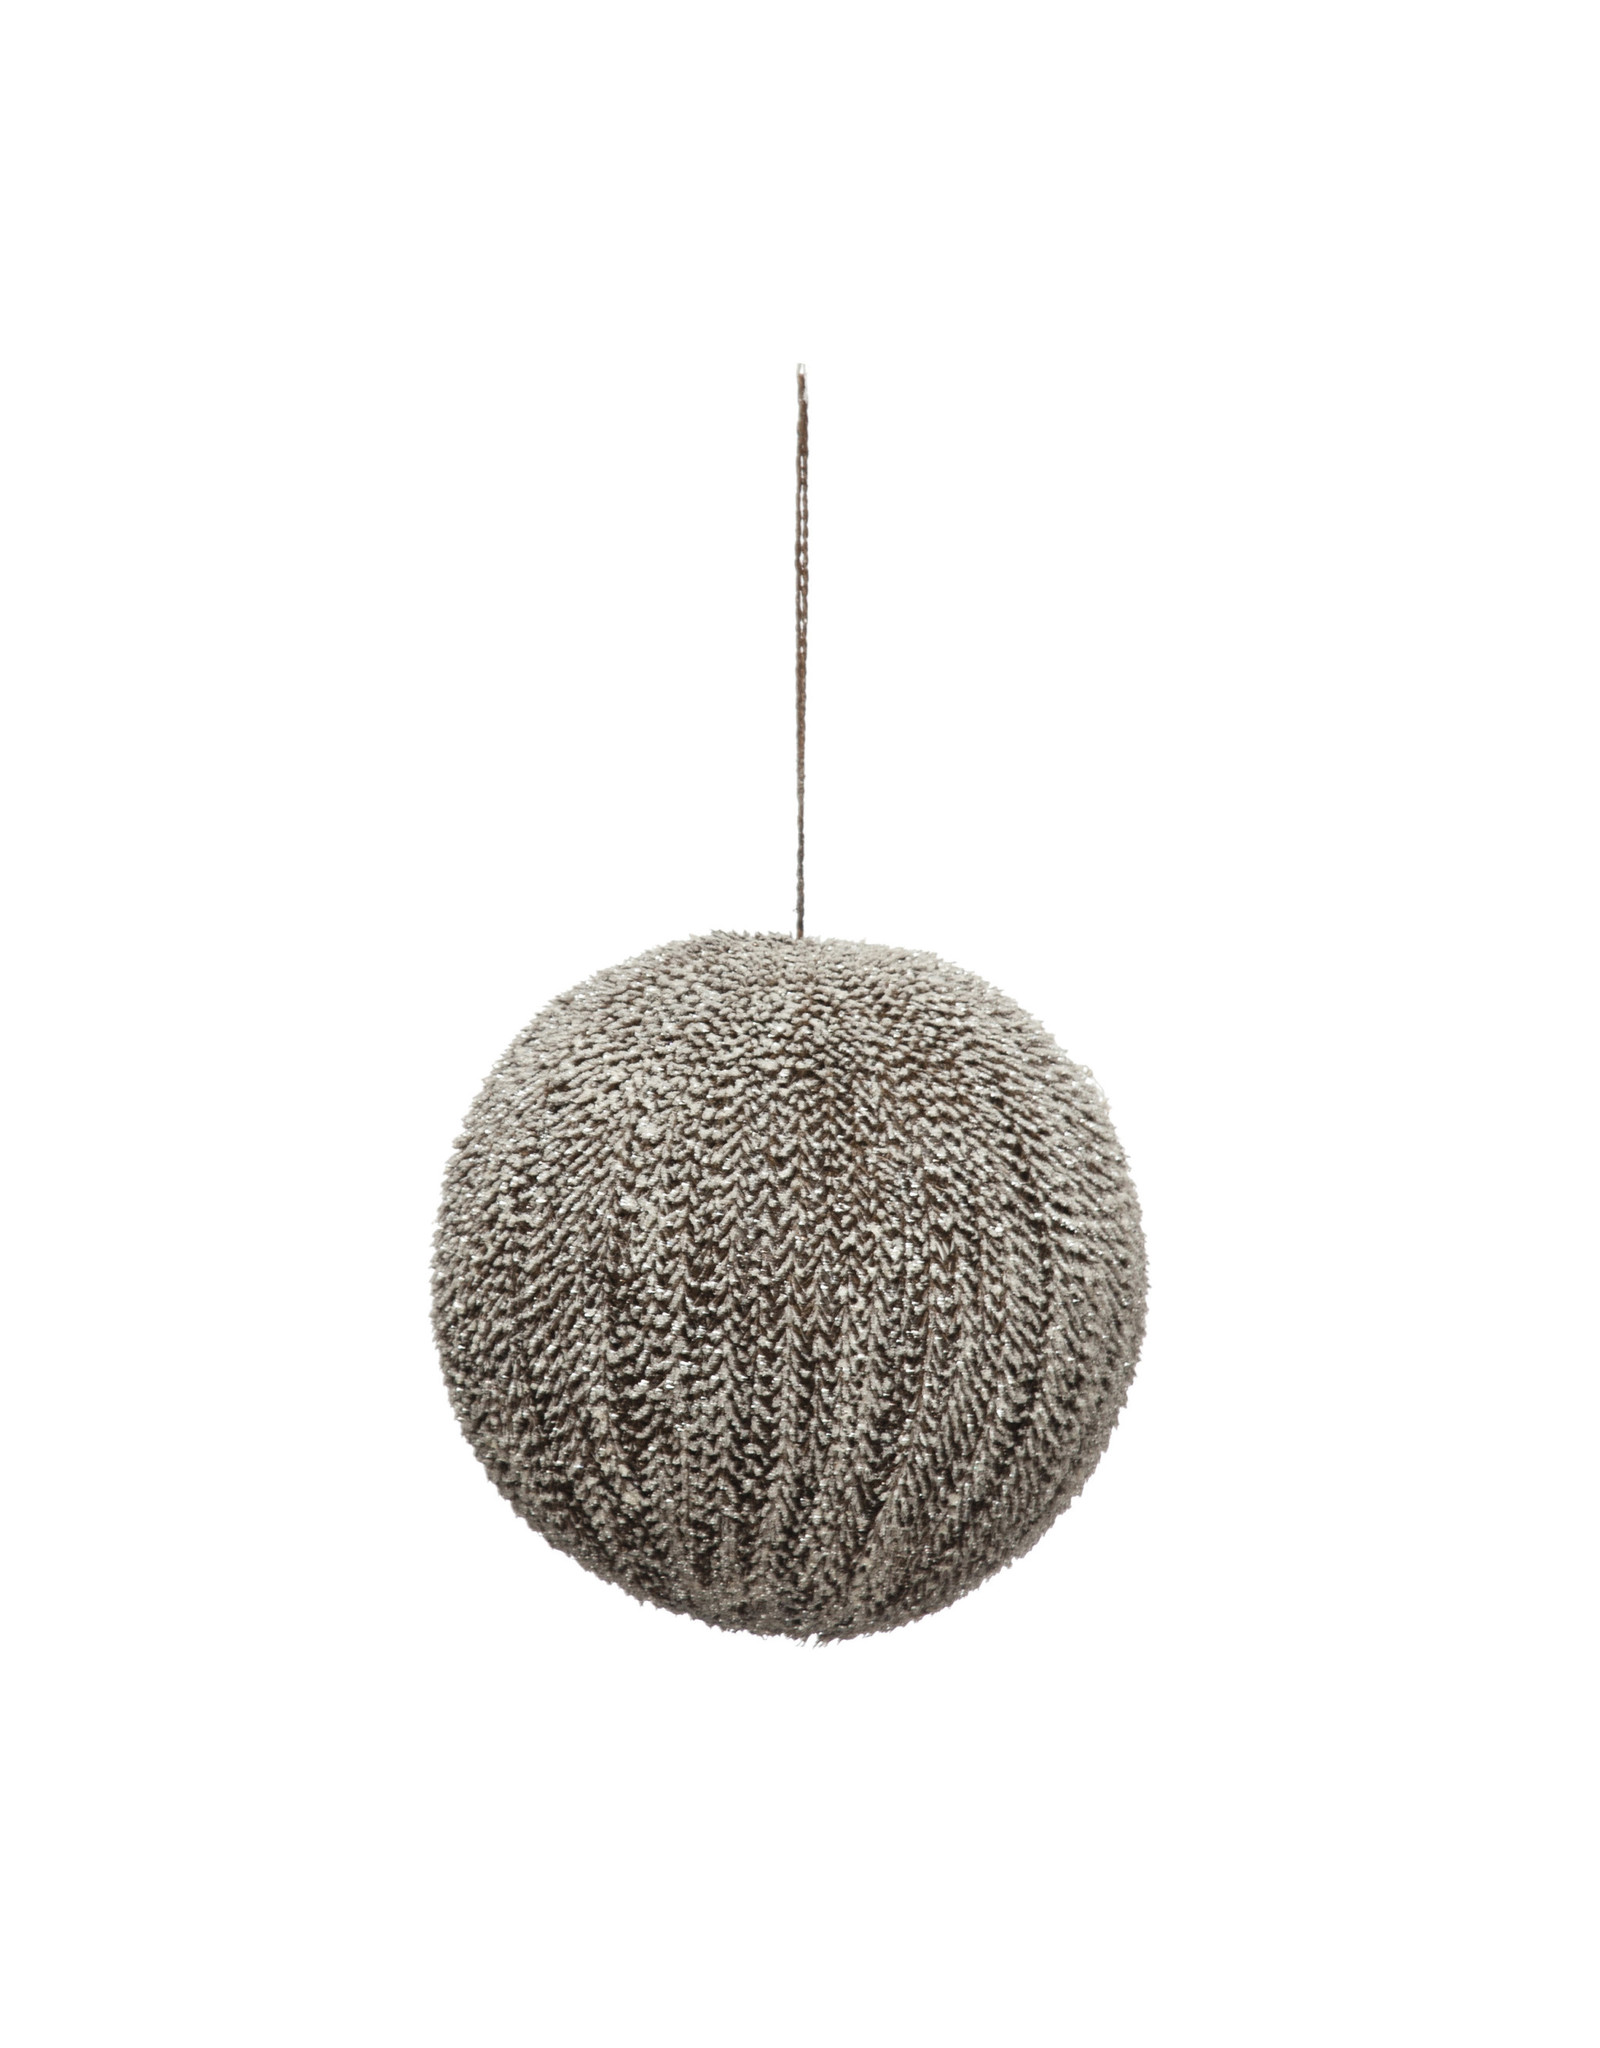 XS0865 8" Round Textured  Ball Ornament, Snow Finish, Brown